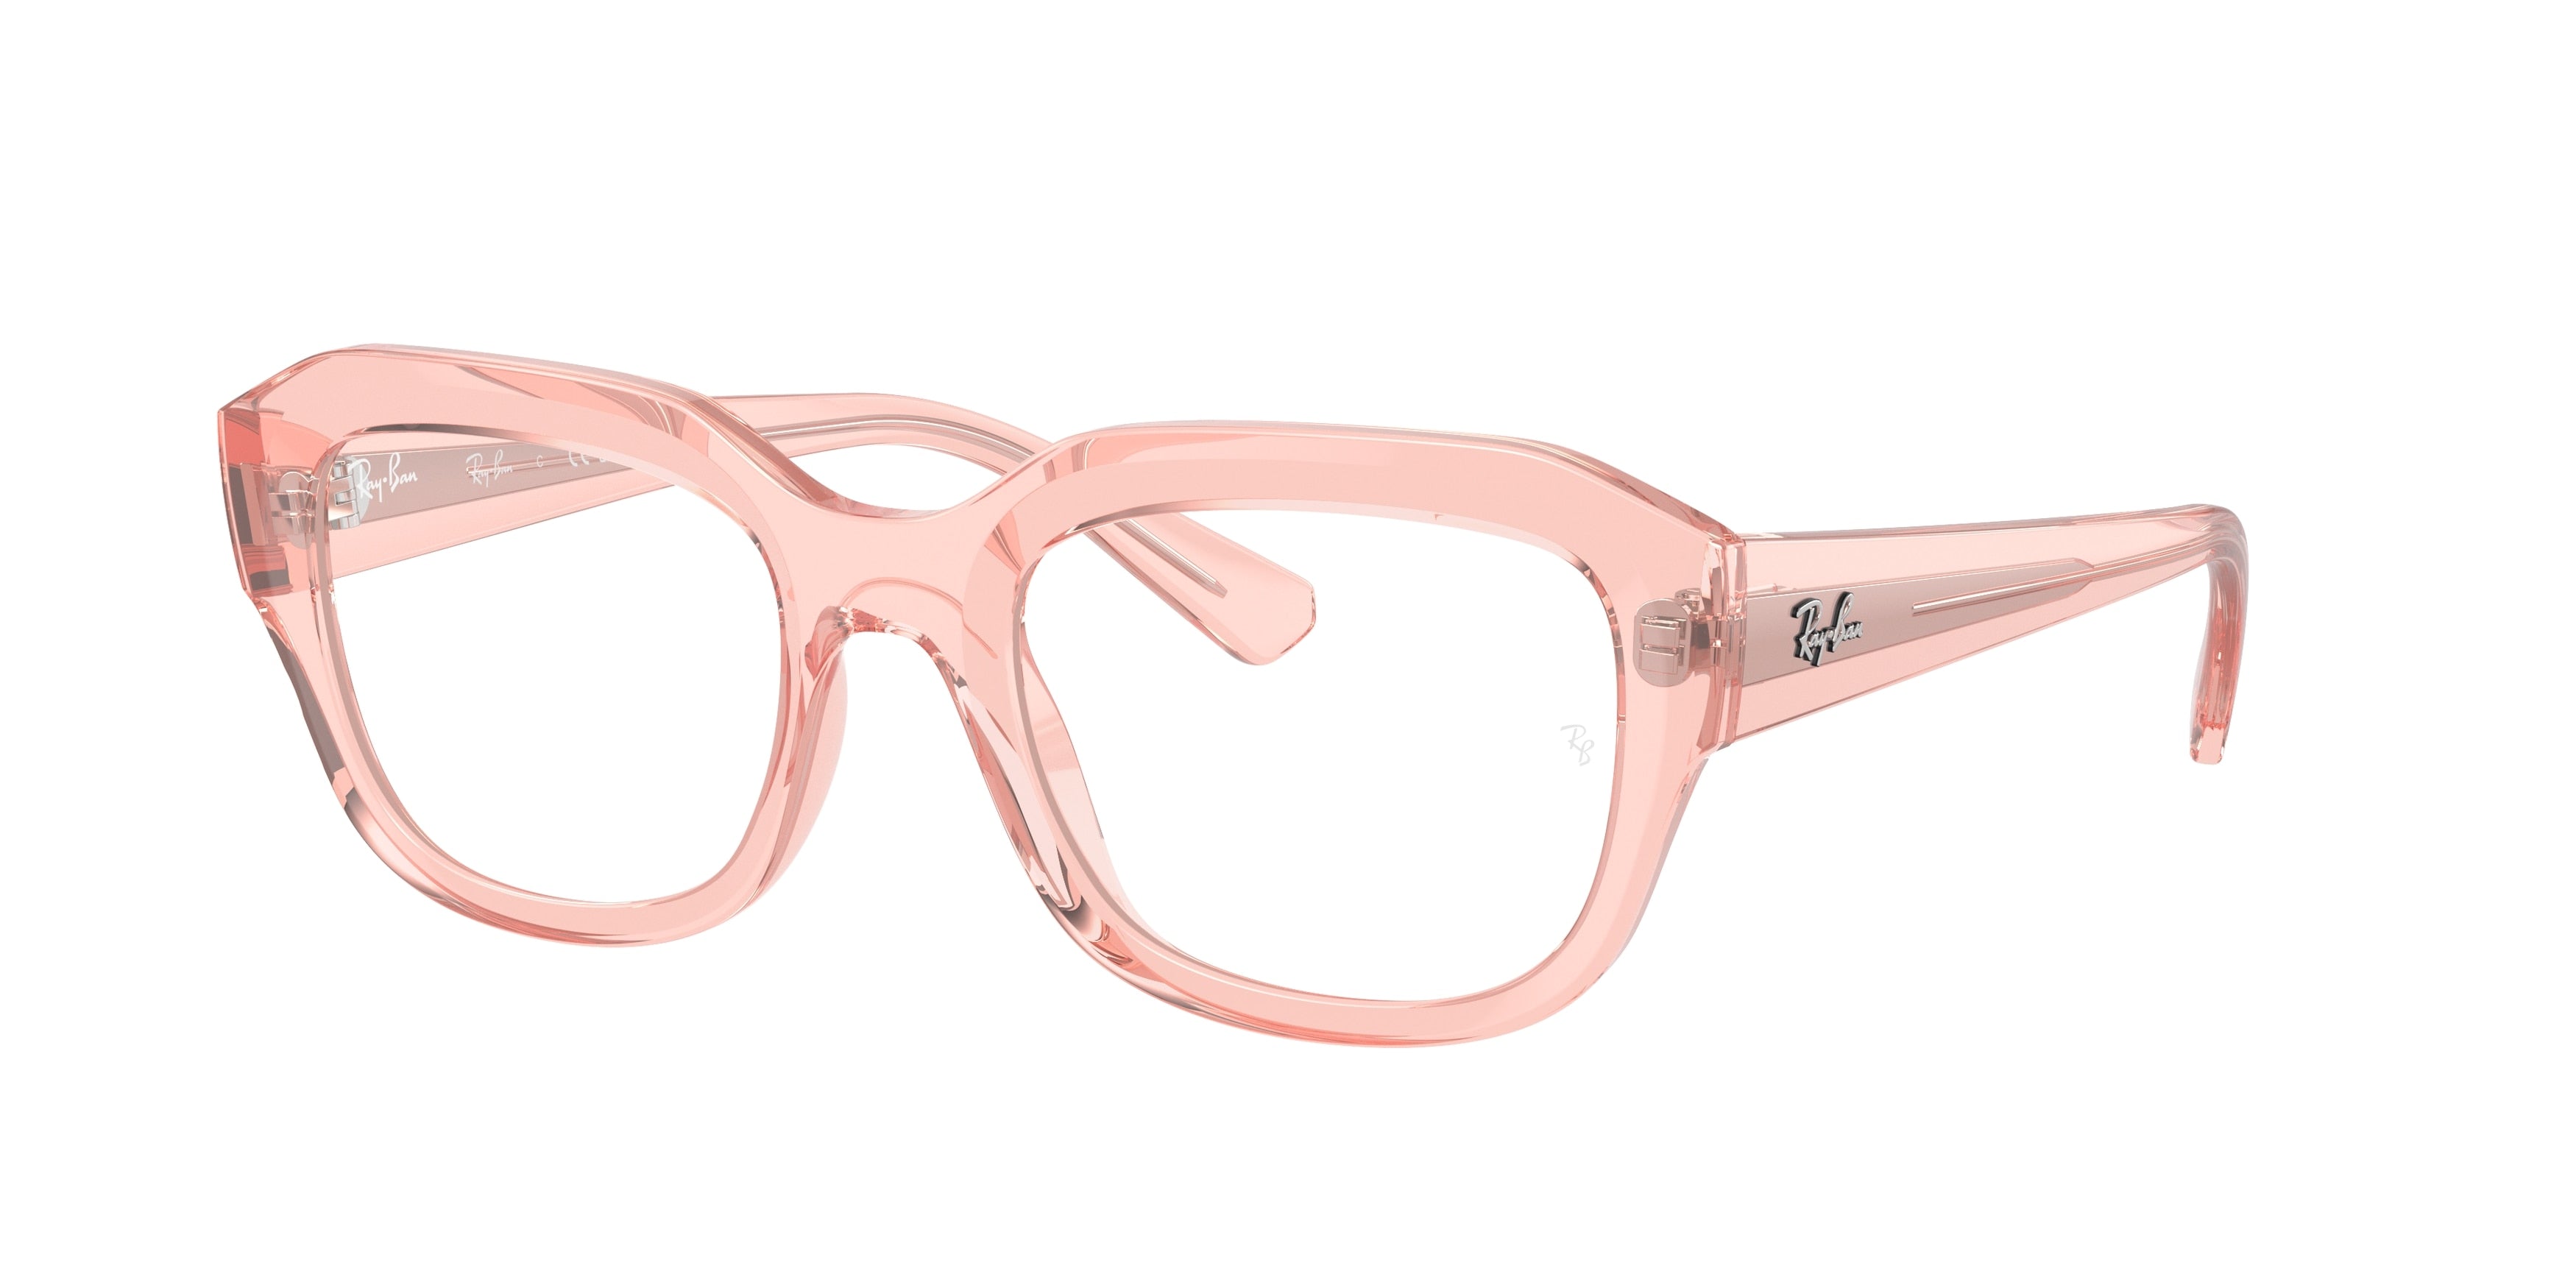 Ray-Ban Optical LEONID RX7225 Square Eyeglasses  8318-Transparent Pink 54-145-20 - Color Map Pink